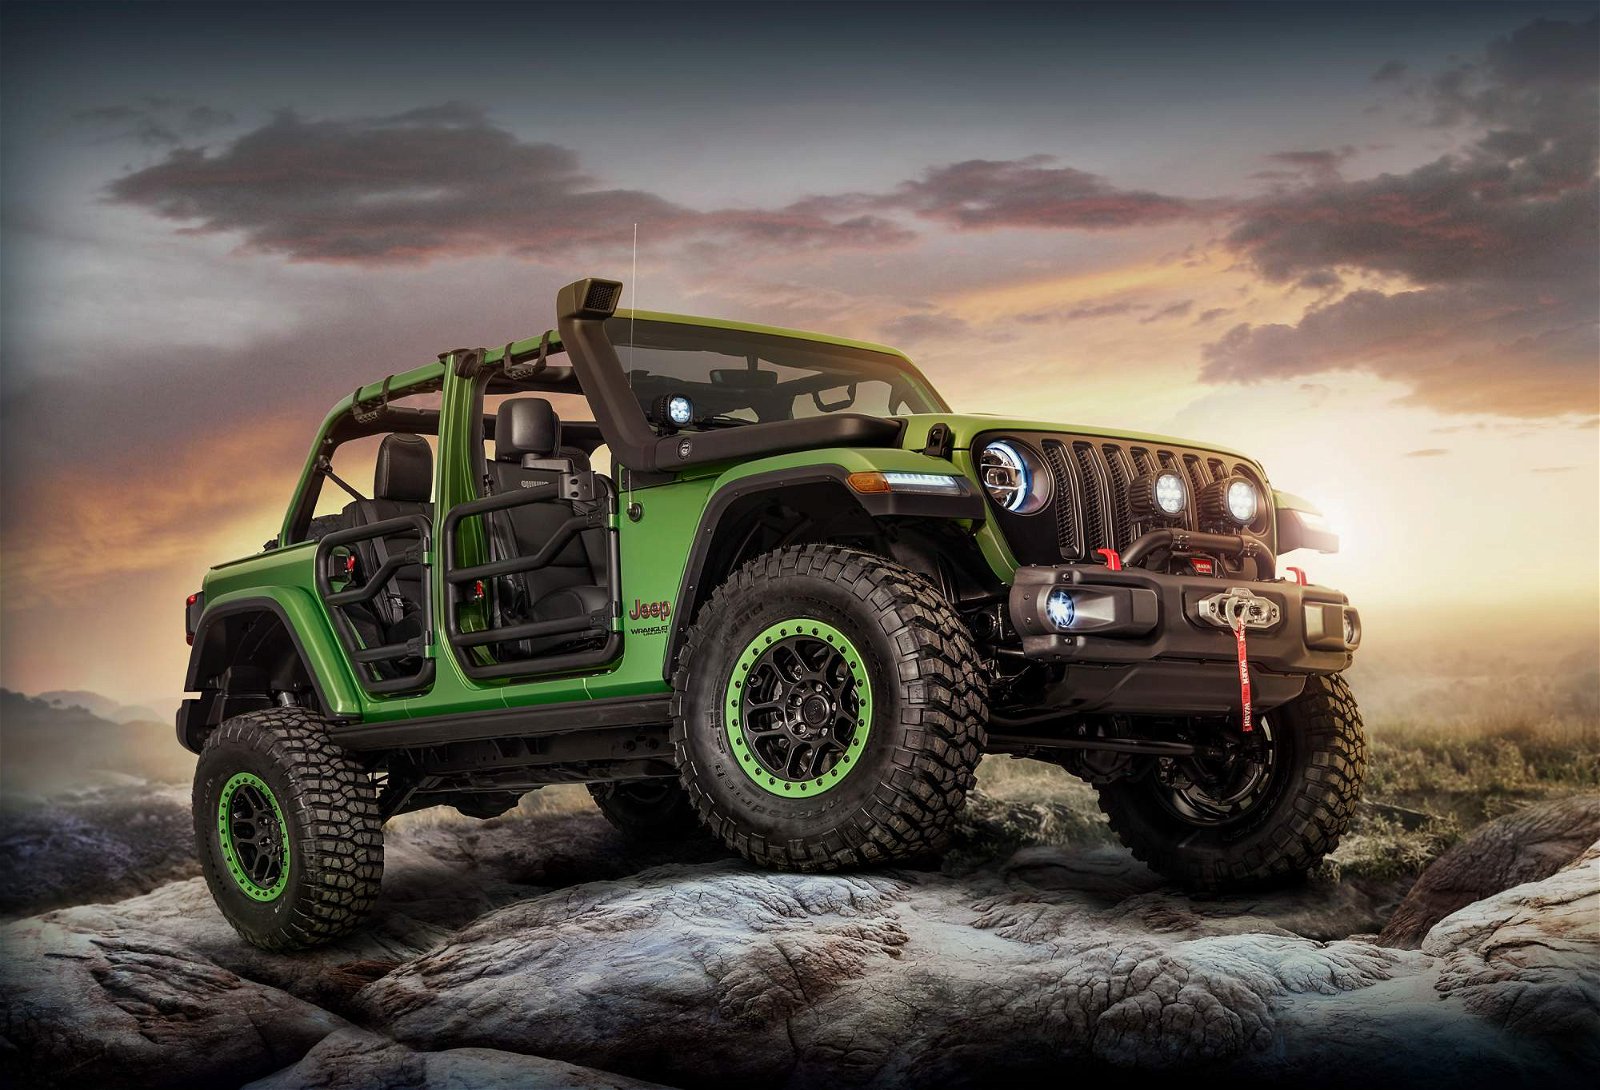 Mopar accessories turn 2018 Jeep Wrangler into extreme off-roader for LA  Auto Show | DriveMag Cars